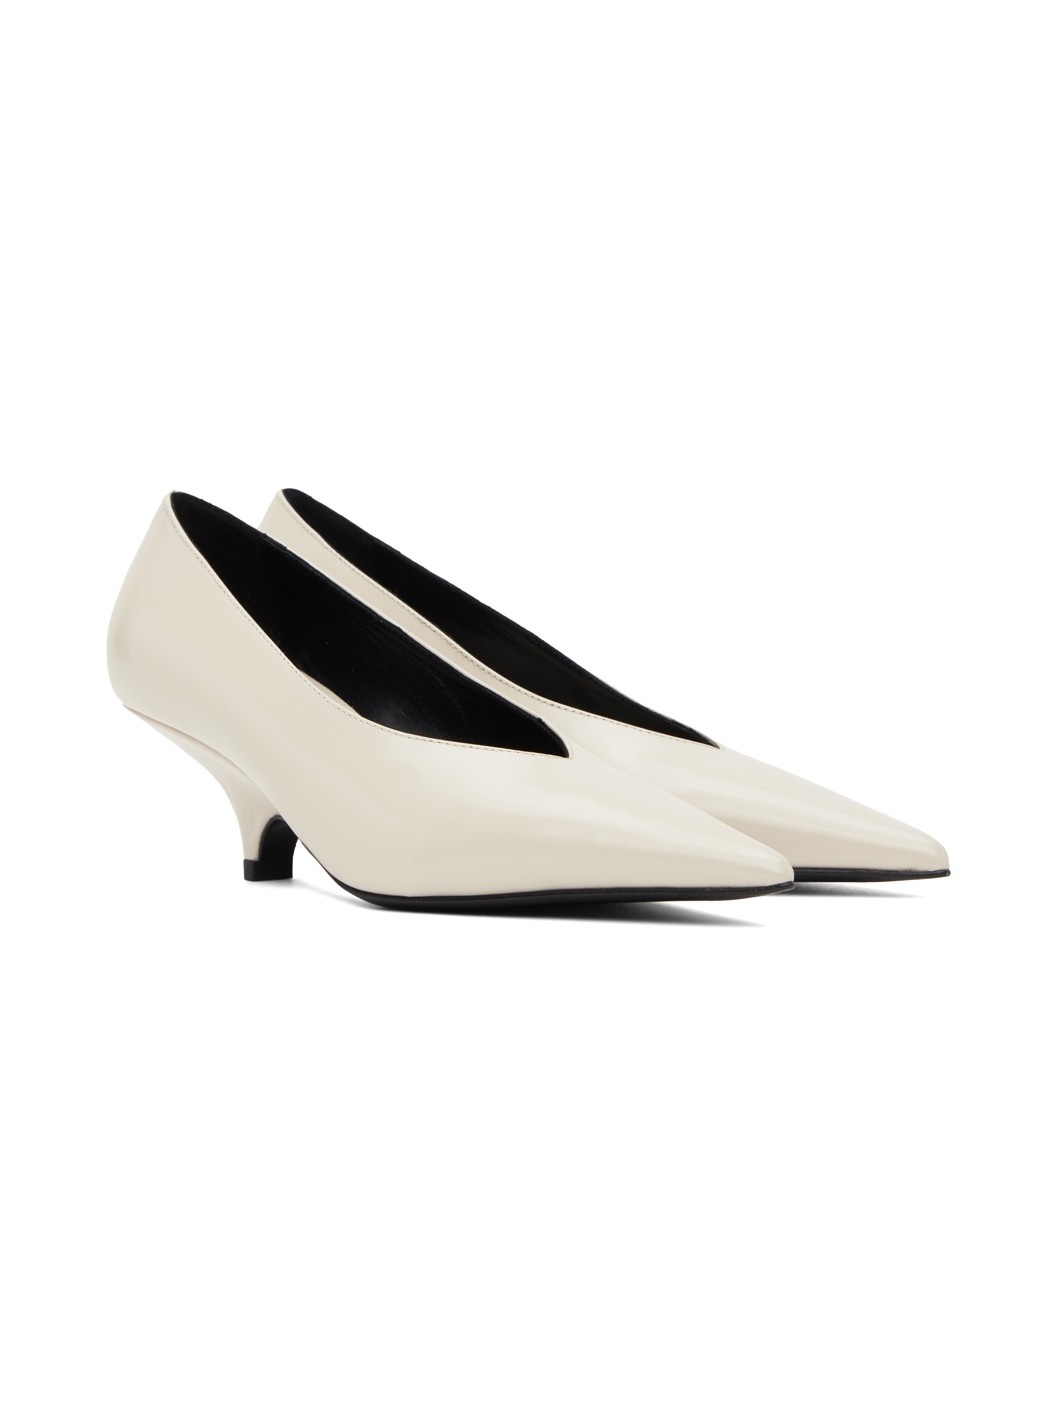 Off-White 'The Wedge' Heels - 4